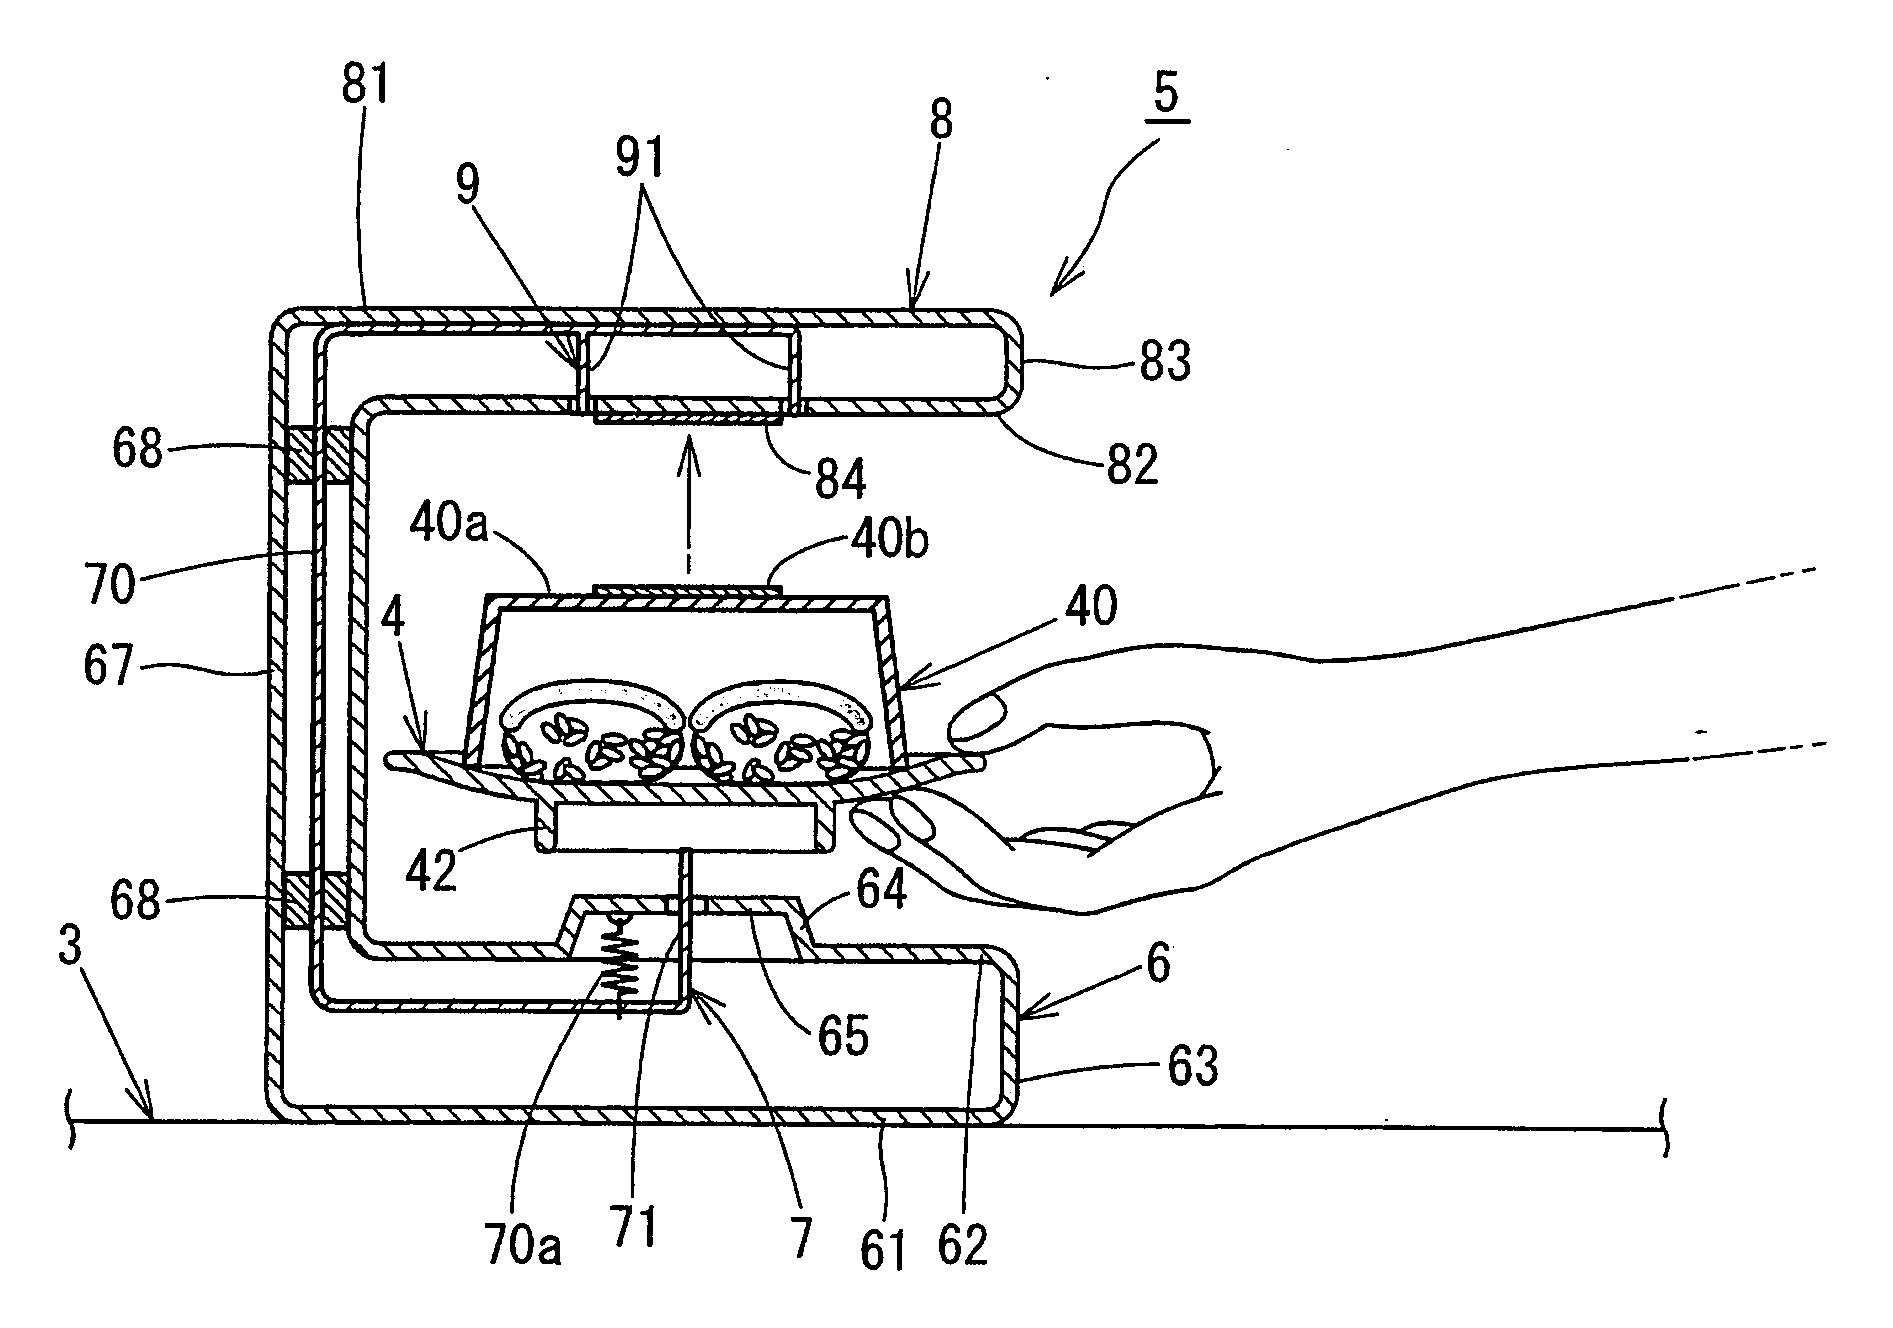 Food and drink conveyance device